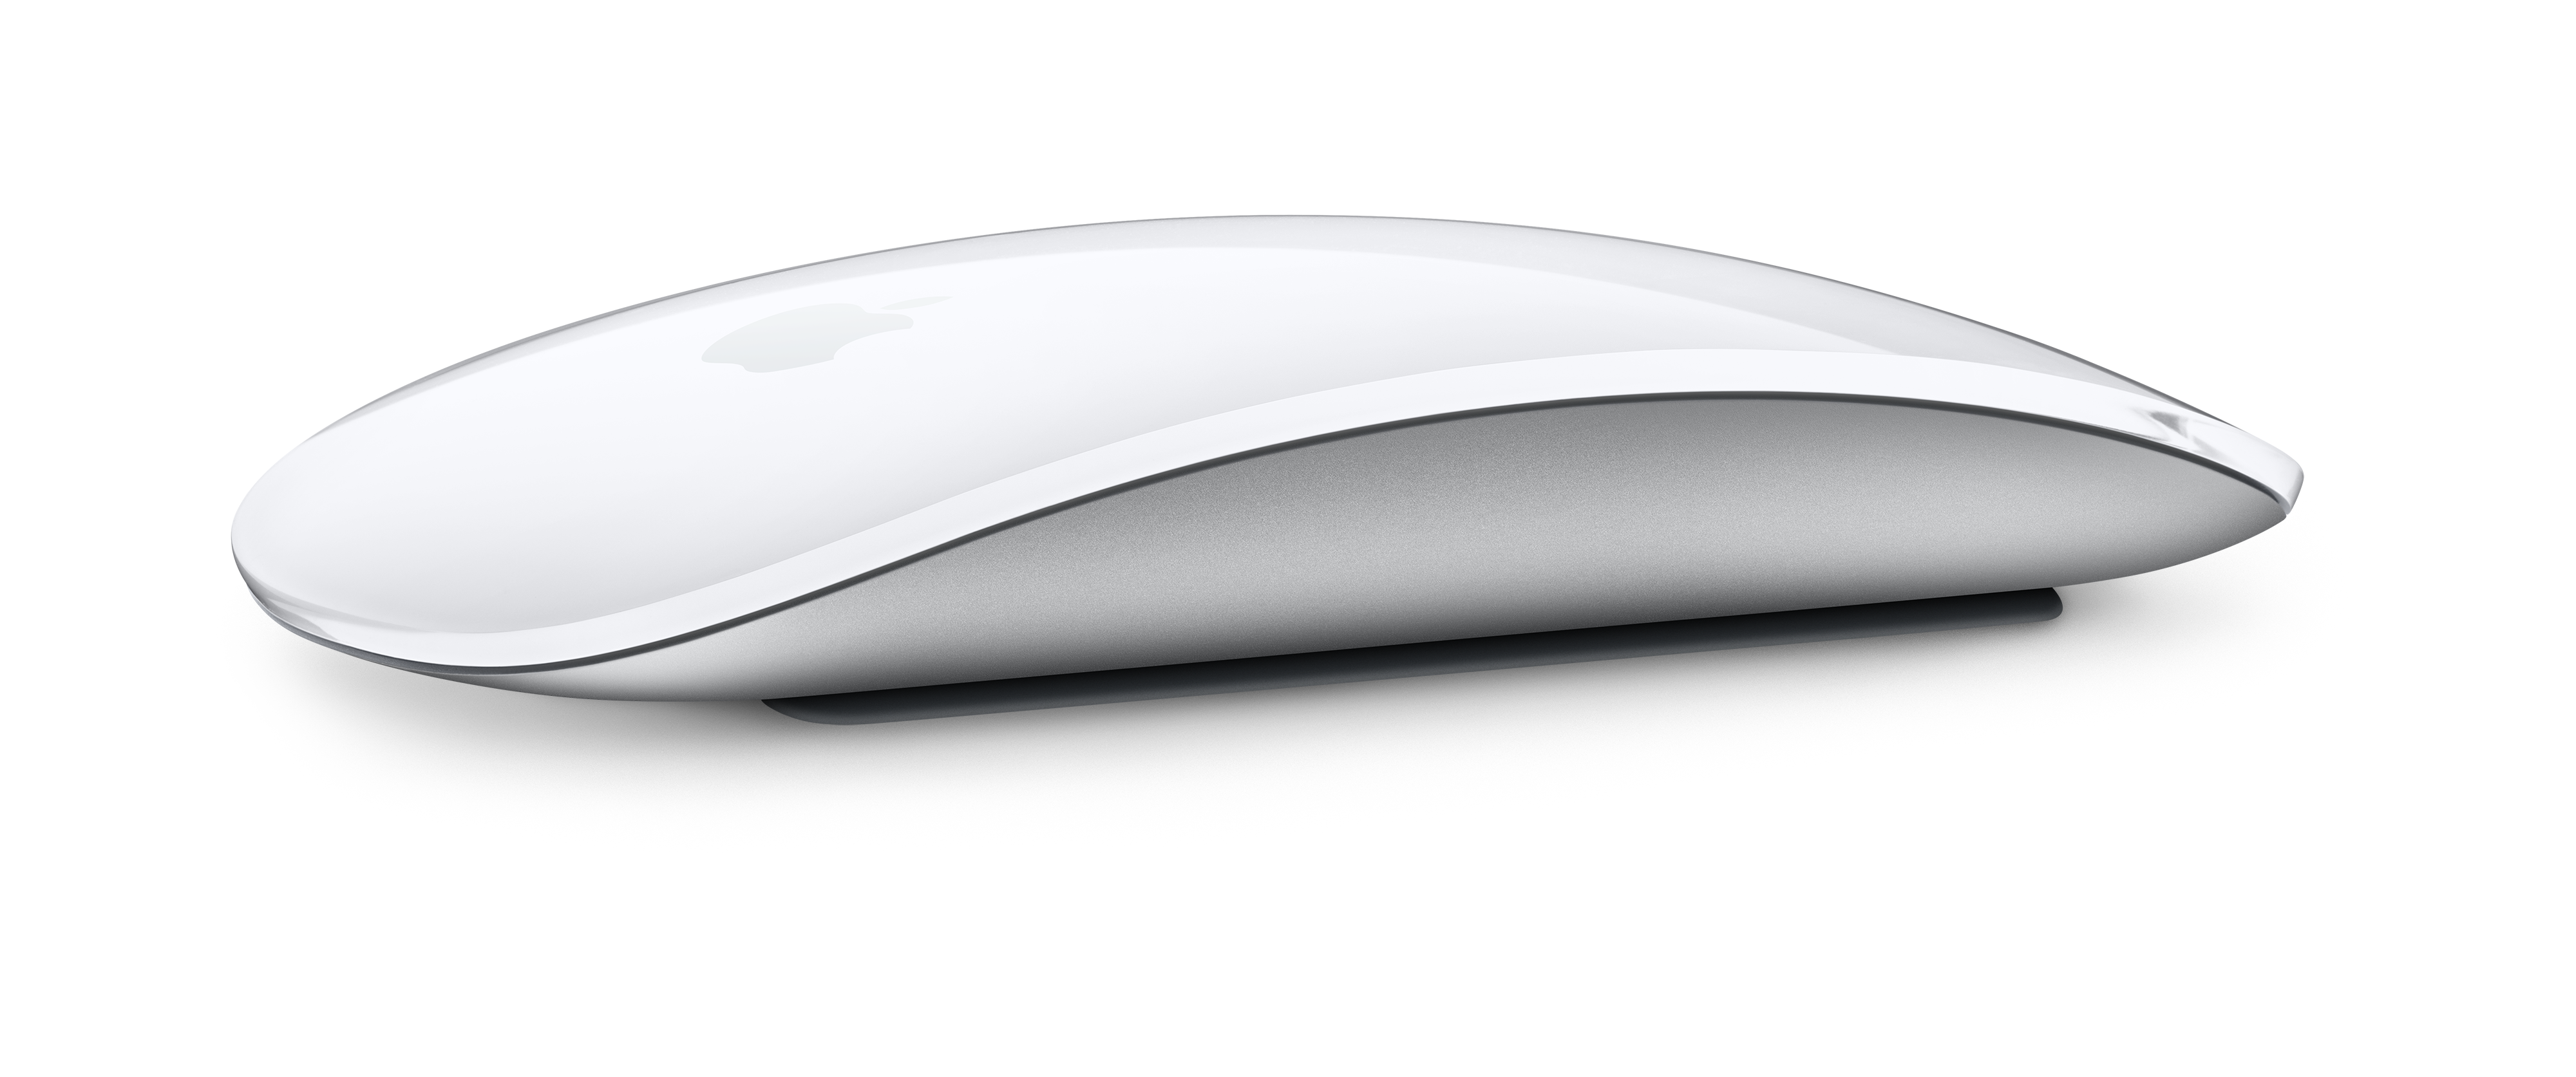 Image of Magic Mouse